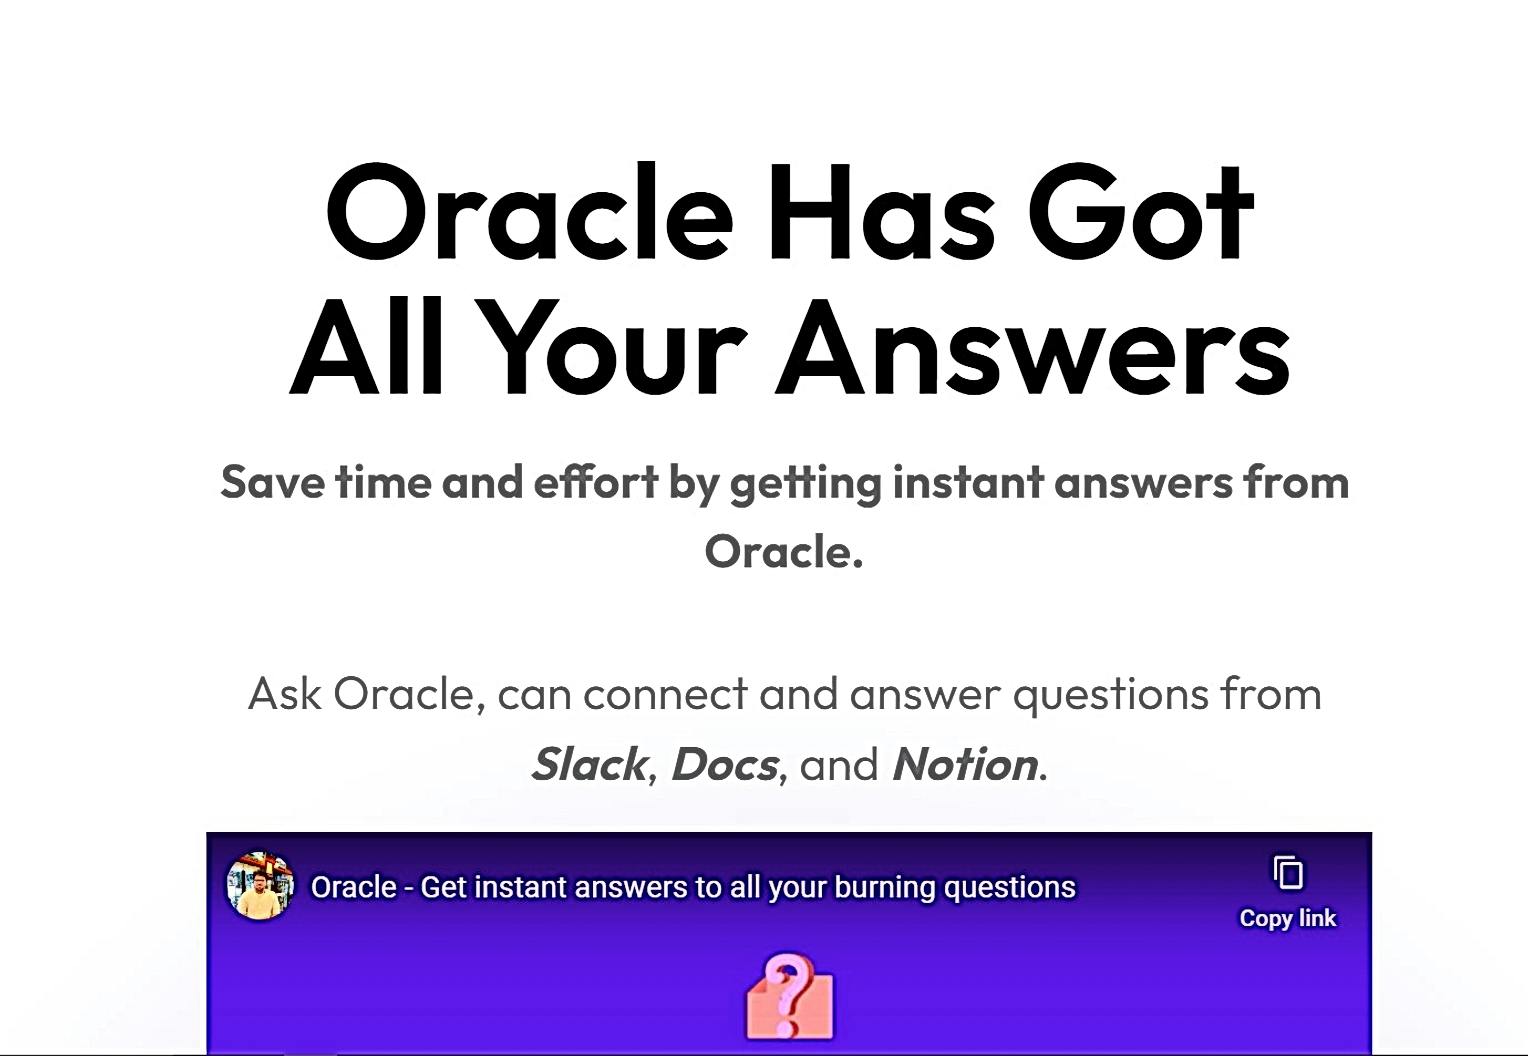 Oracle featured